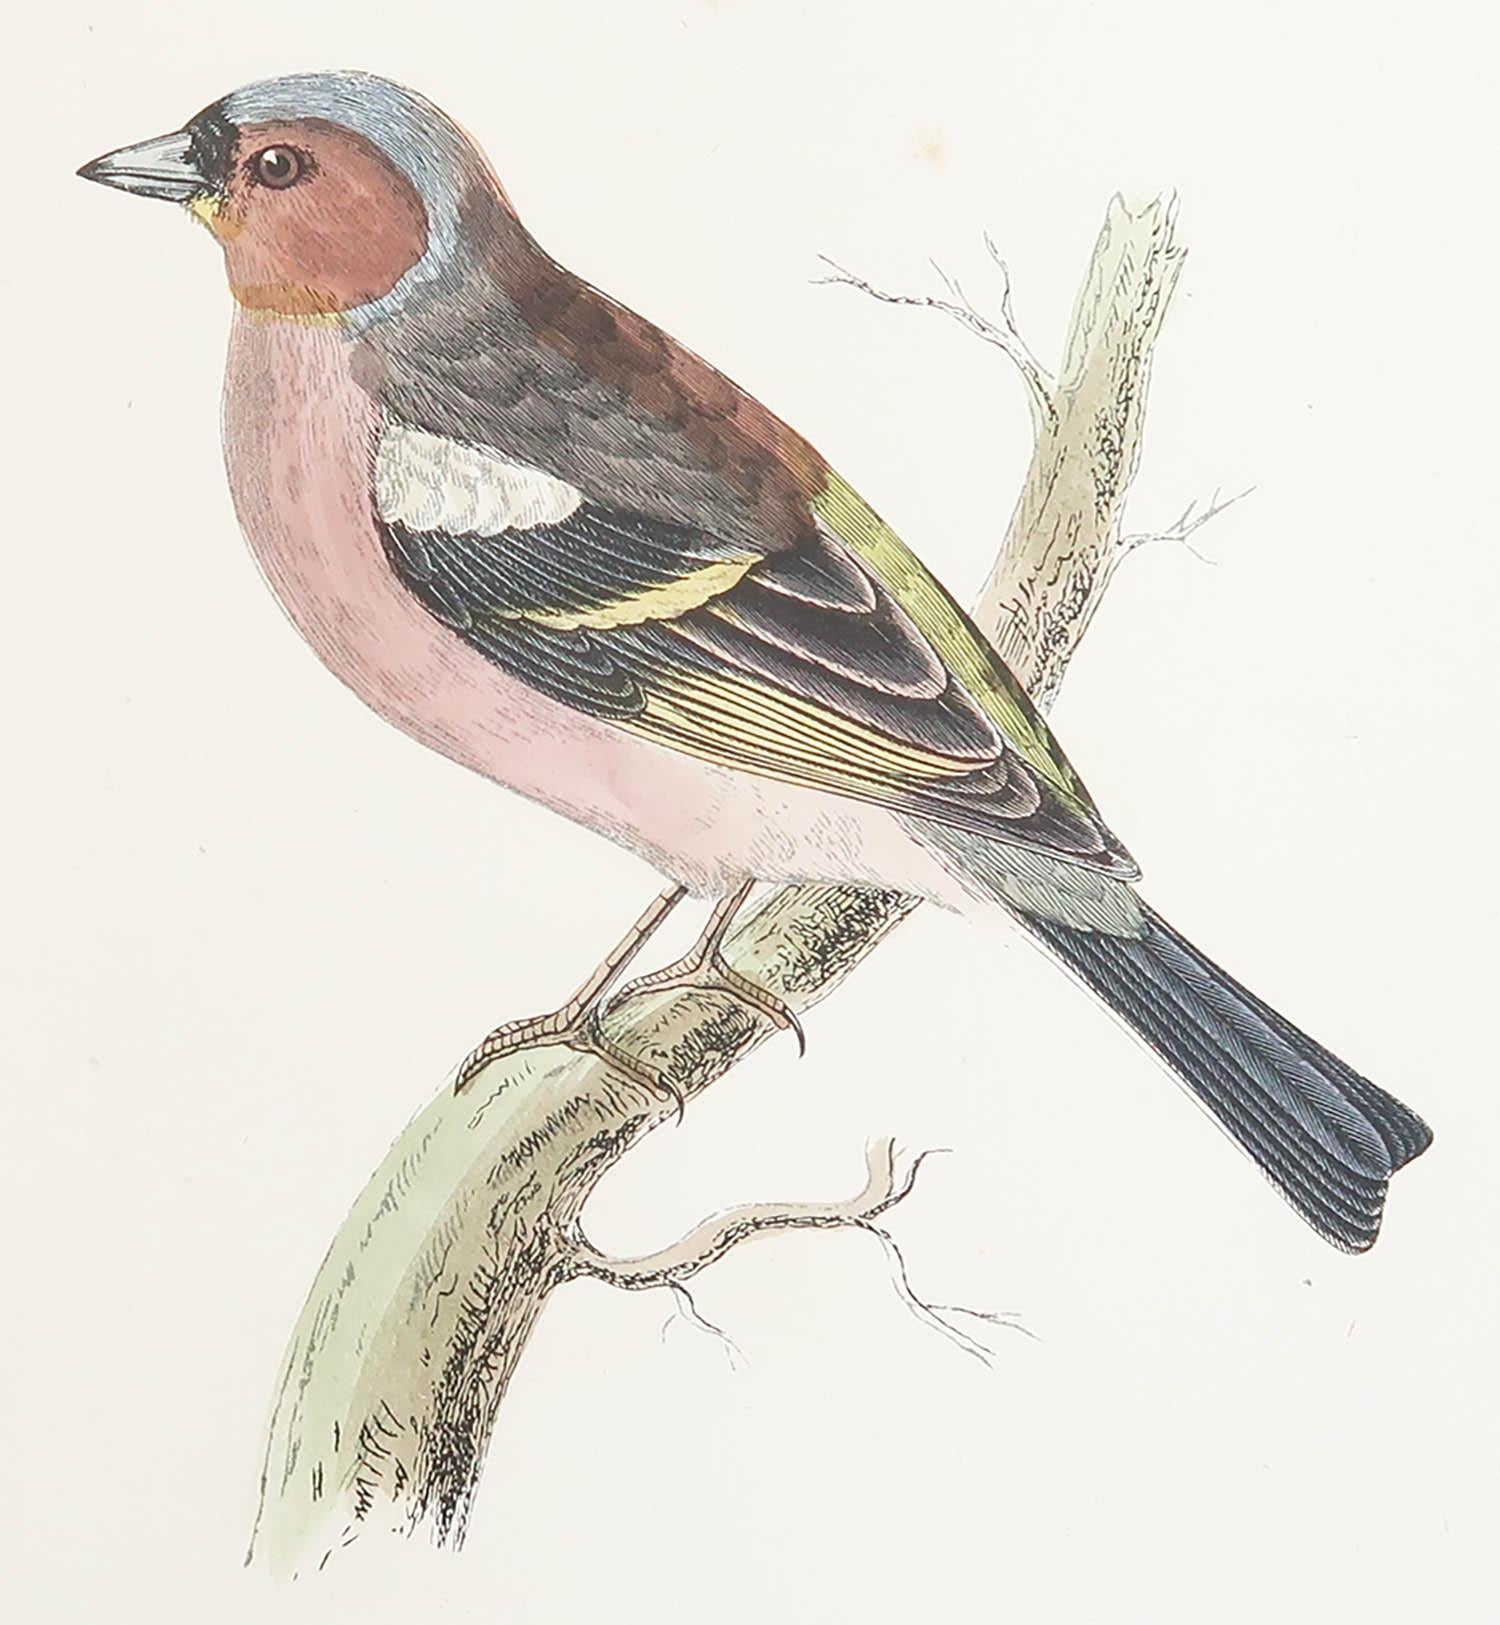 Great image of a Chaffinch

Unframed. It gives you the option of perhaps making a set up using your own choice of frames.

Lithograph after Alexander Francis Lydon.

Original color

Published, circa 1880

Free shipping.




